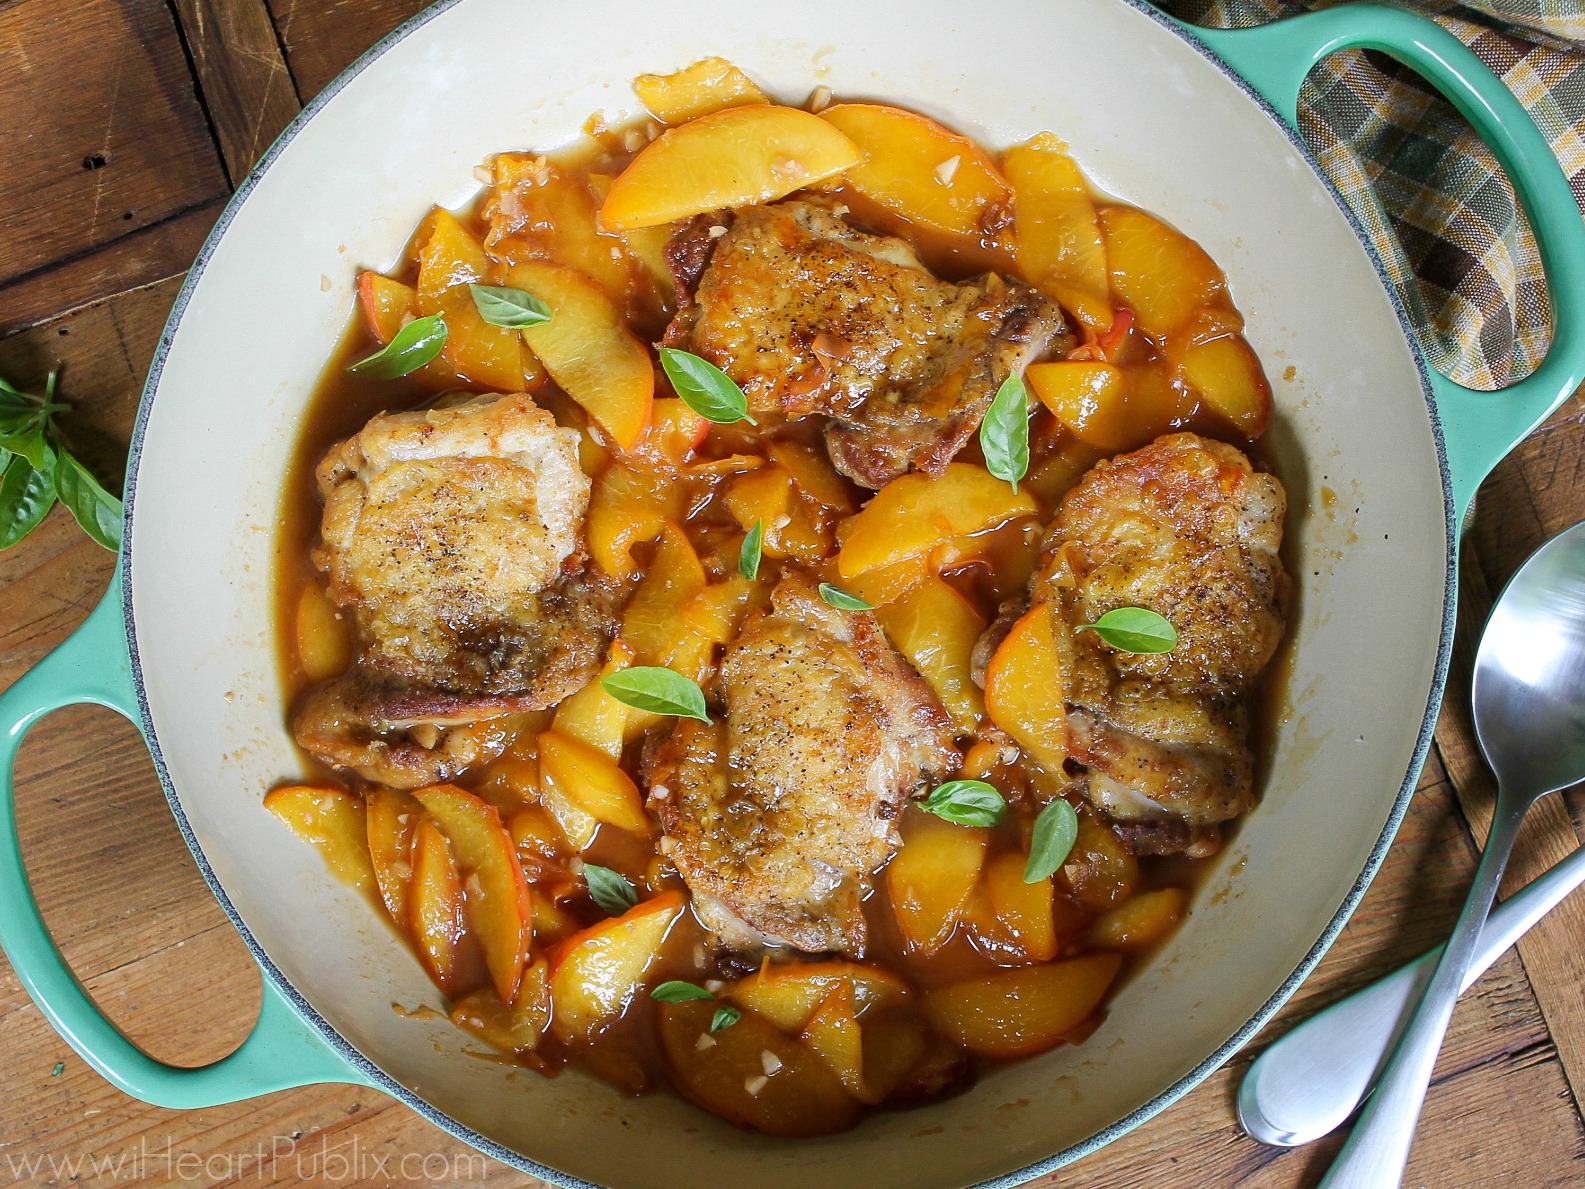 Sticky Peach Chicken - Super Meal To Go With The Sales At Publix